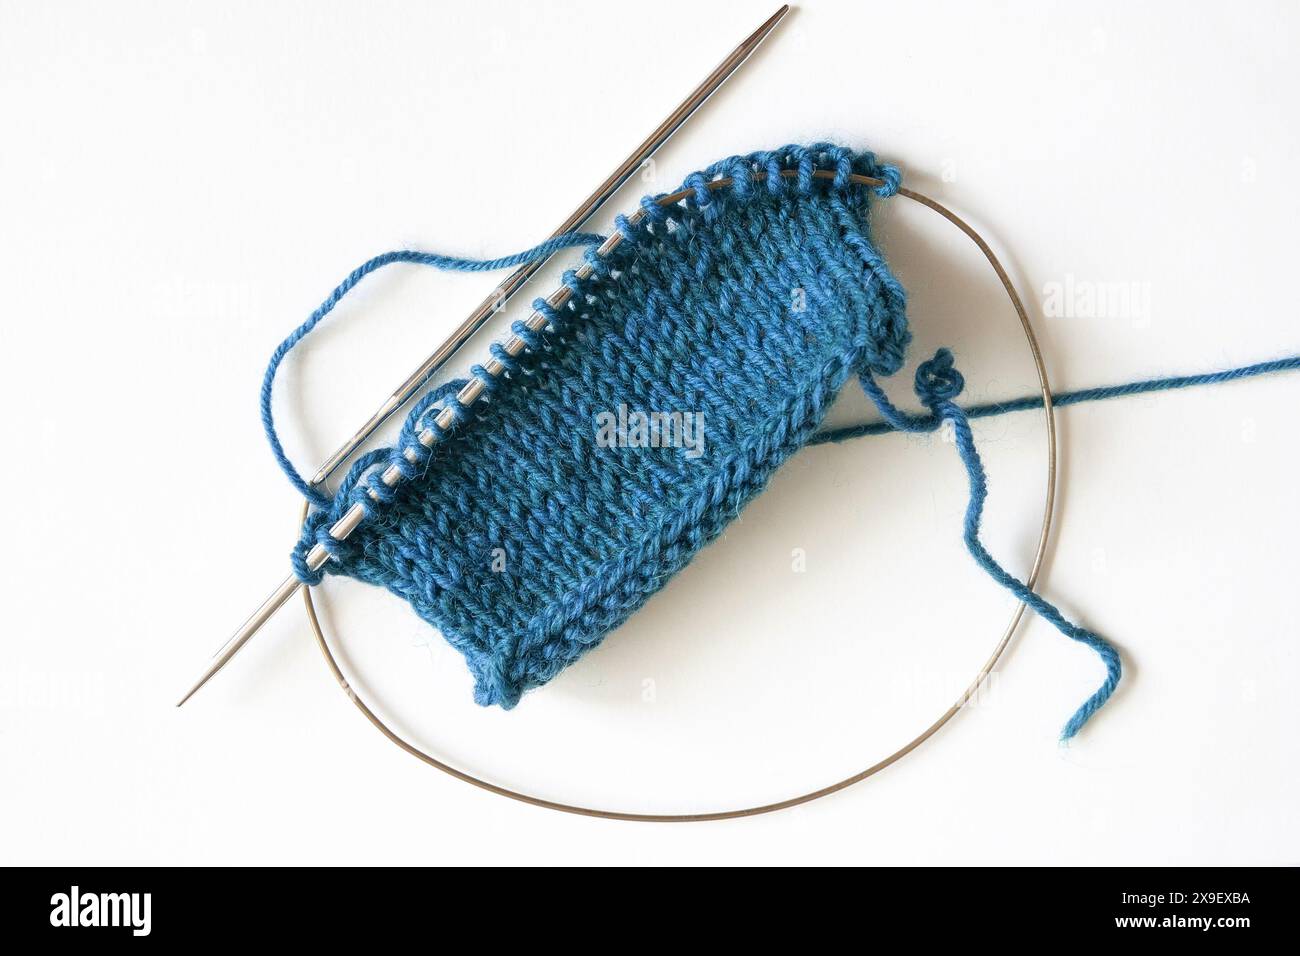 Tabletop photography of stockinette stitch blue turquoise knitting project on circular needles on a white background Stock Photo